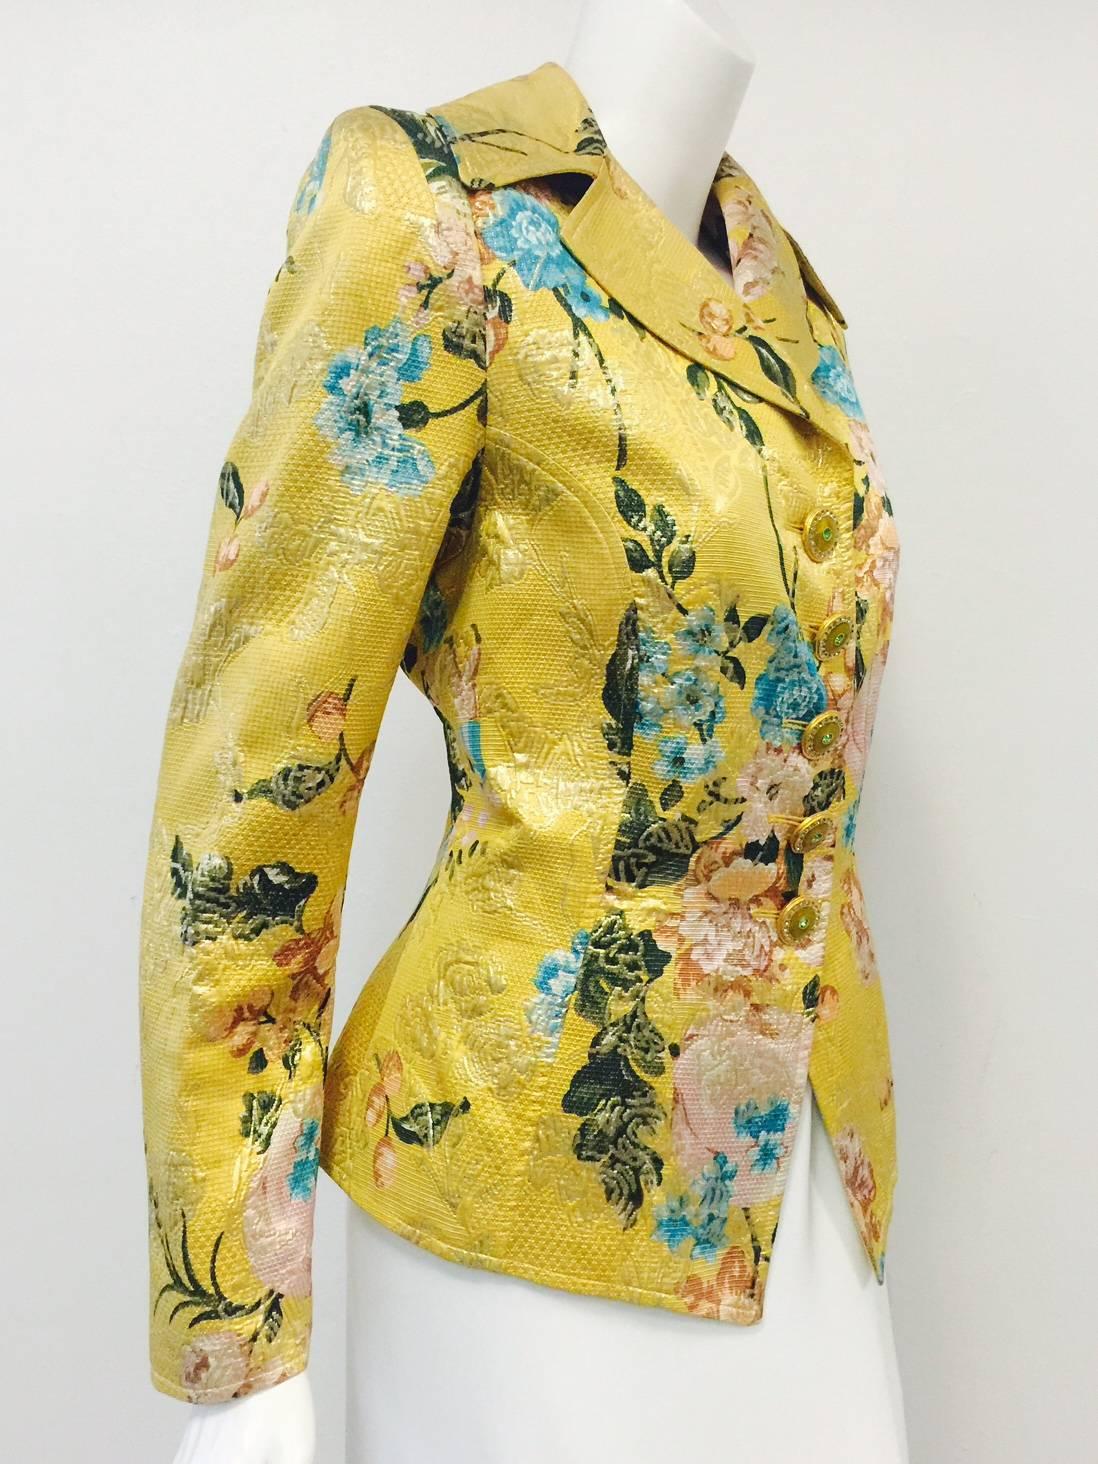 This Gold Metallic Brocade Fitted Jacket shows why Christian Lacroix was one of the most celebrated haute couturier's of the 20th Century!  Features exquisite fabric and mauve, turquoise, peach and forest green floral print.  Nipped waist and